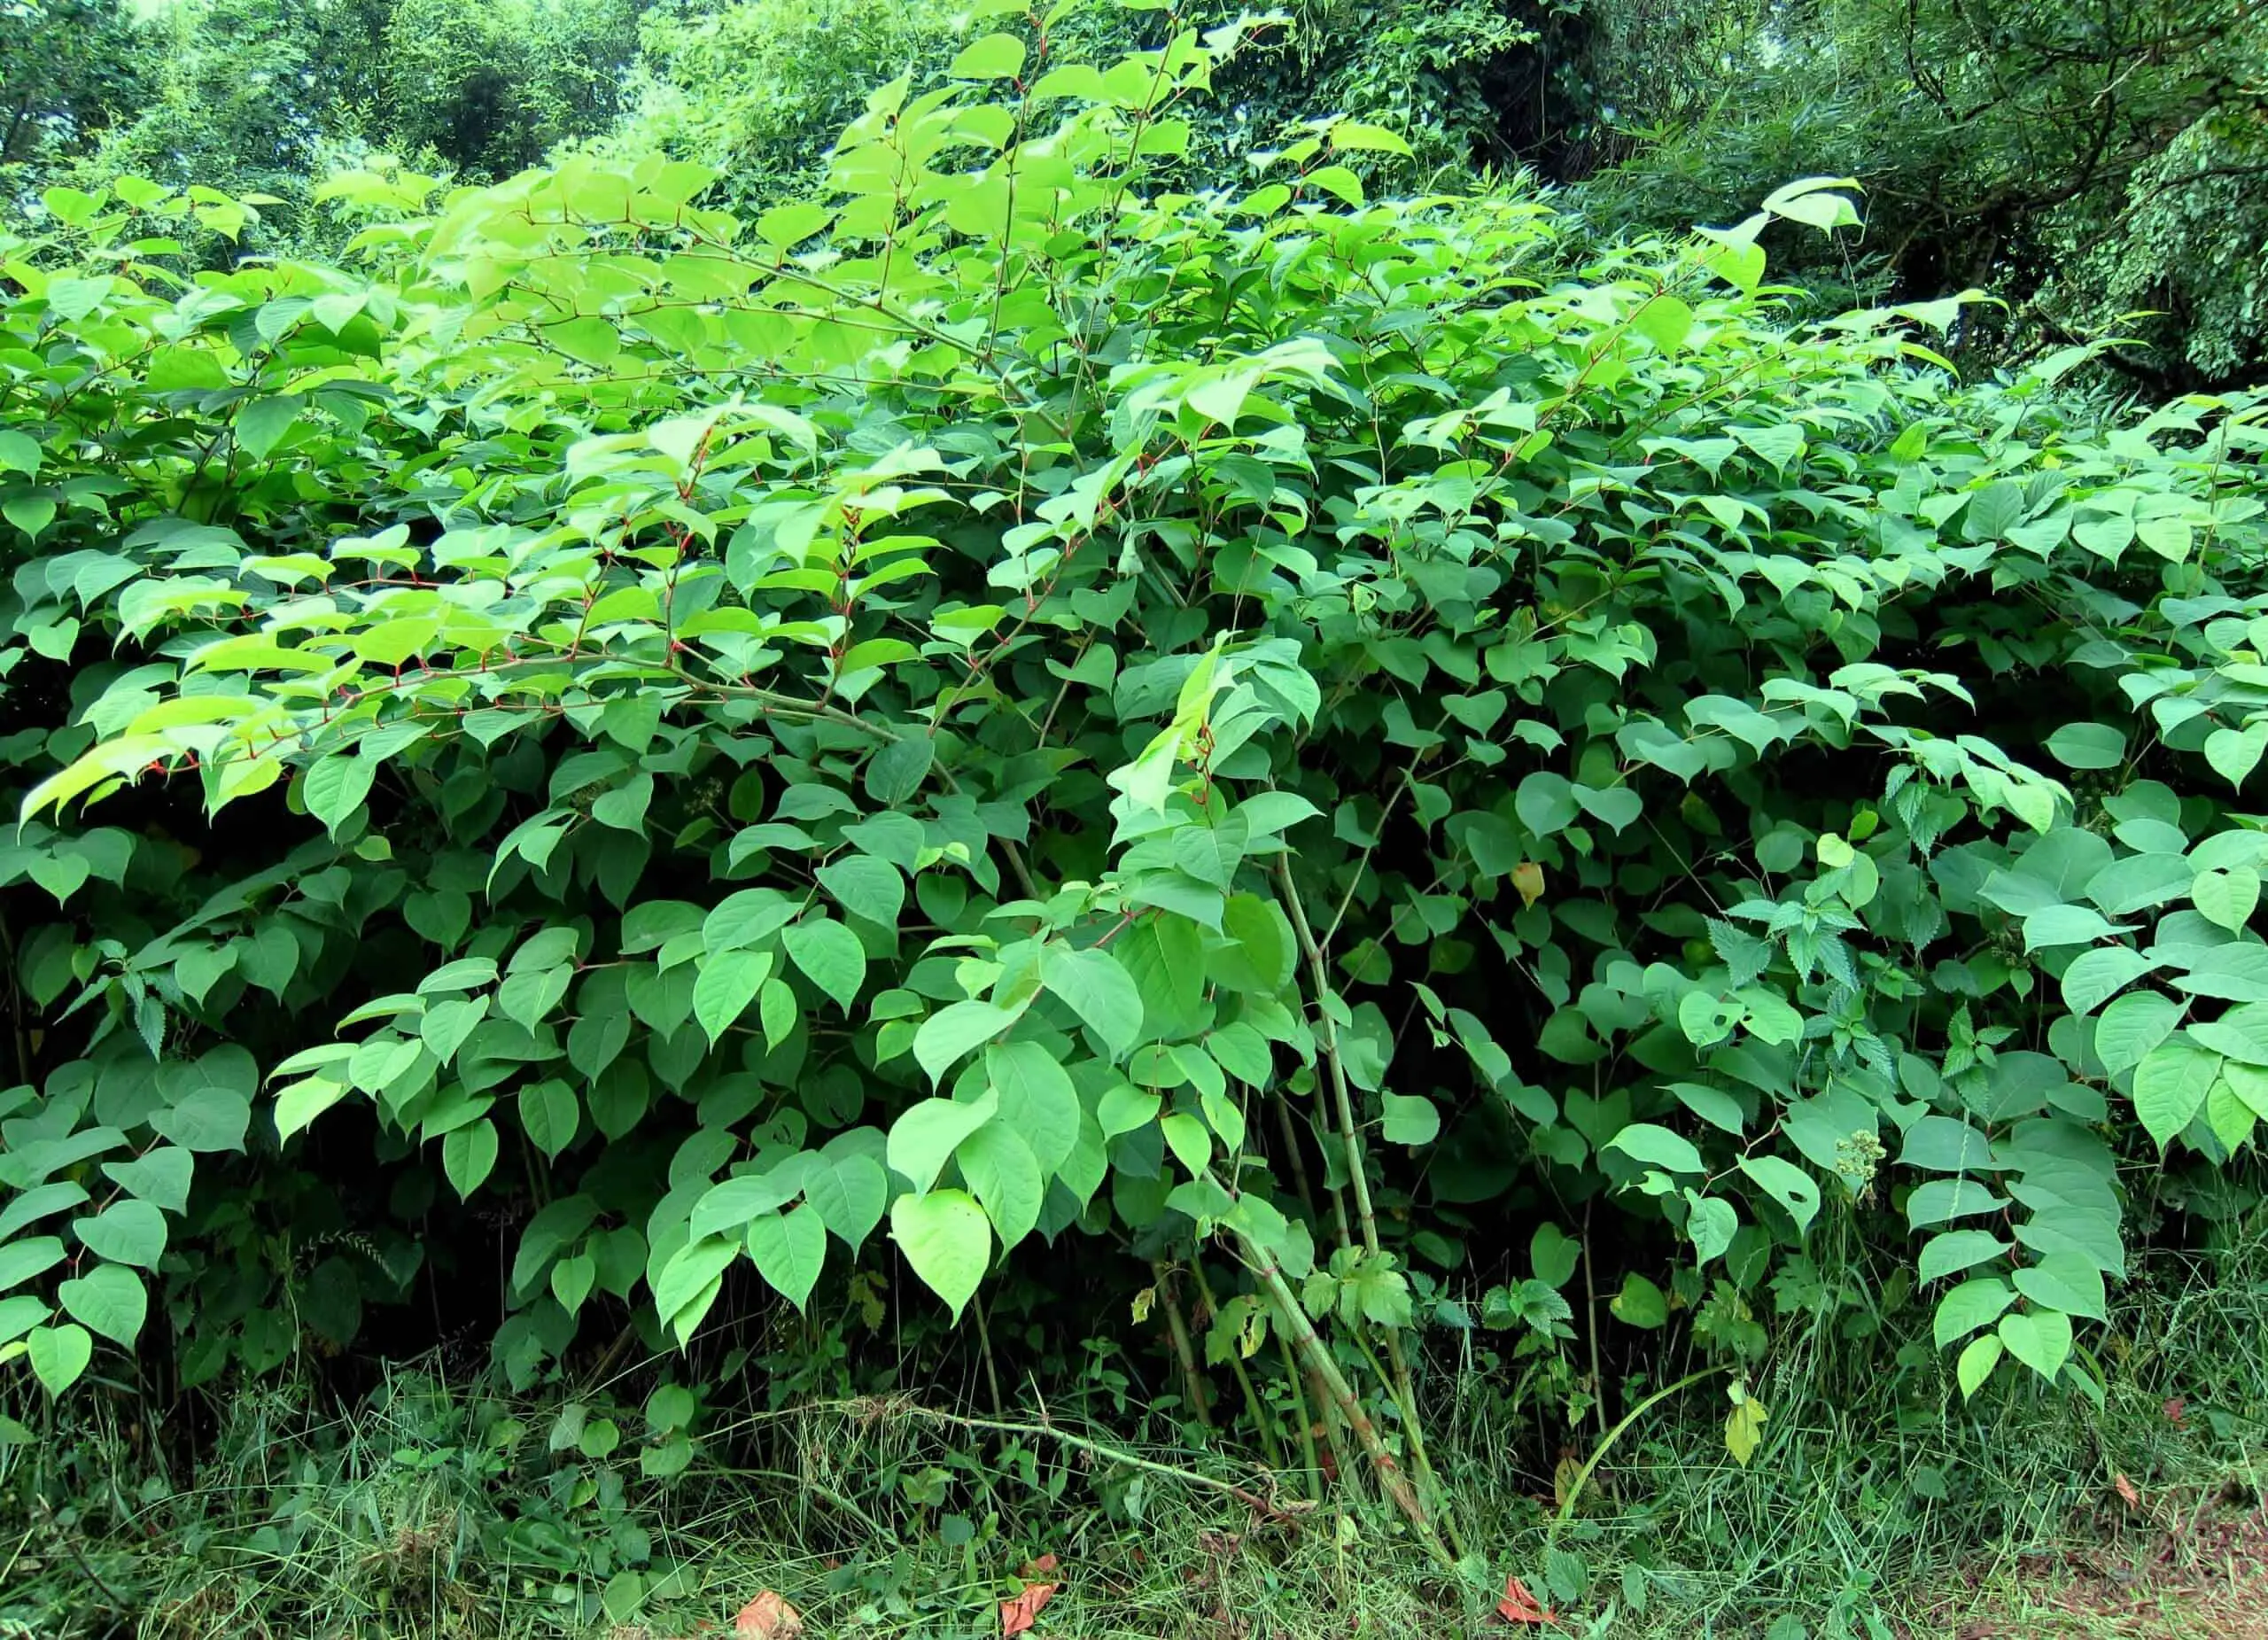 Japanese knotweed identification to be better informed in deciding what course of action to take scaled